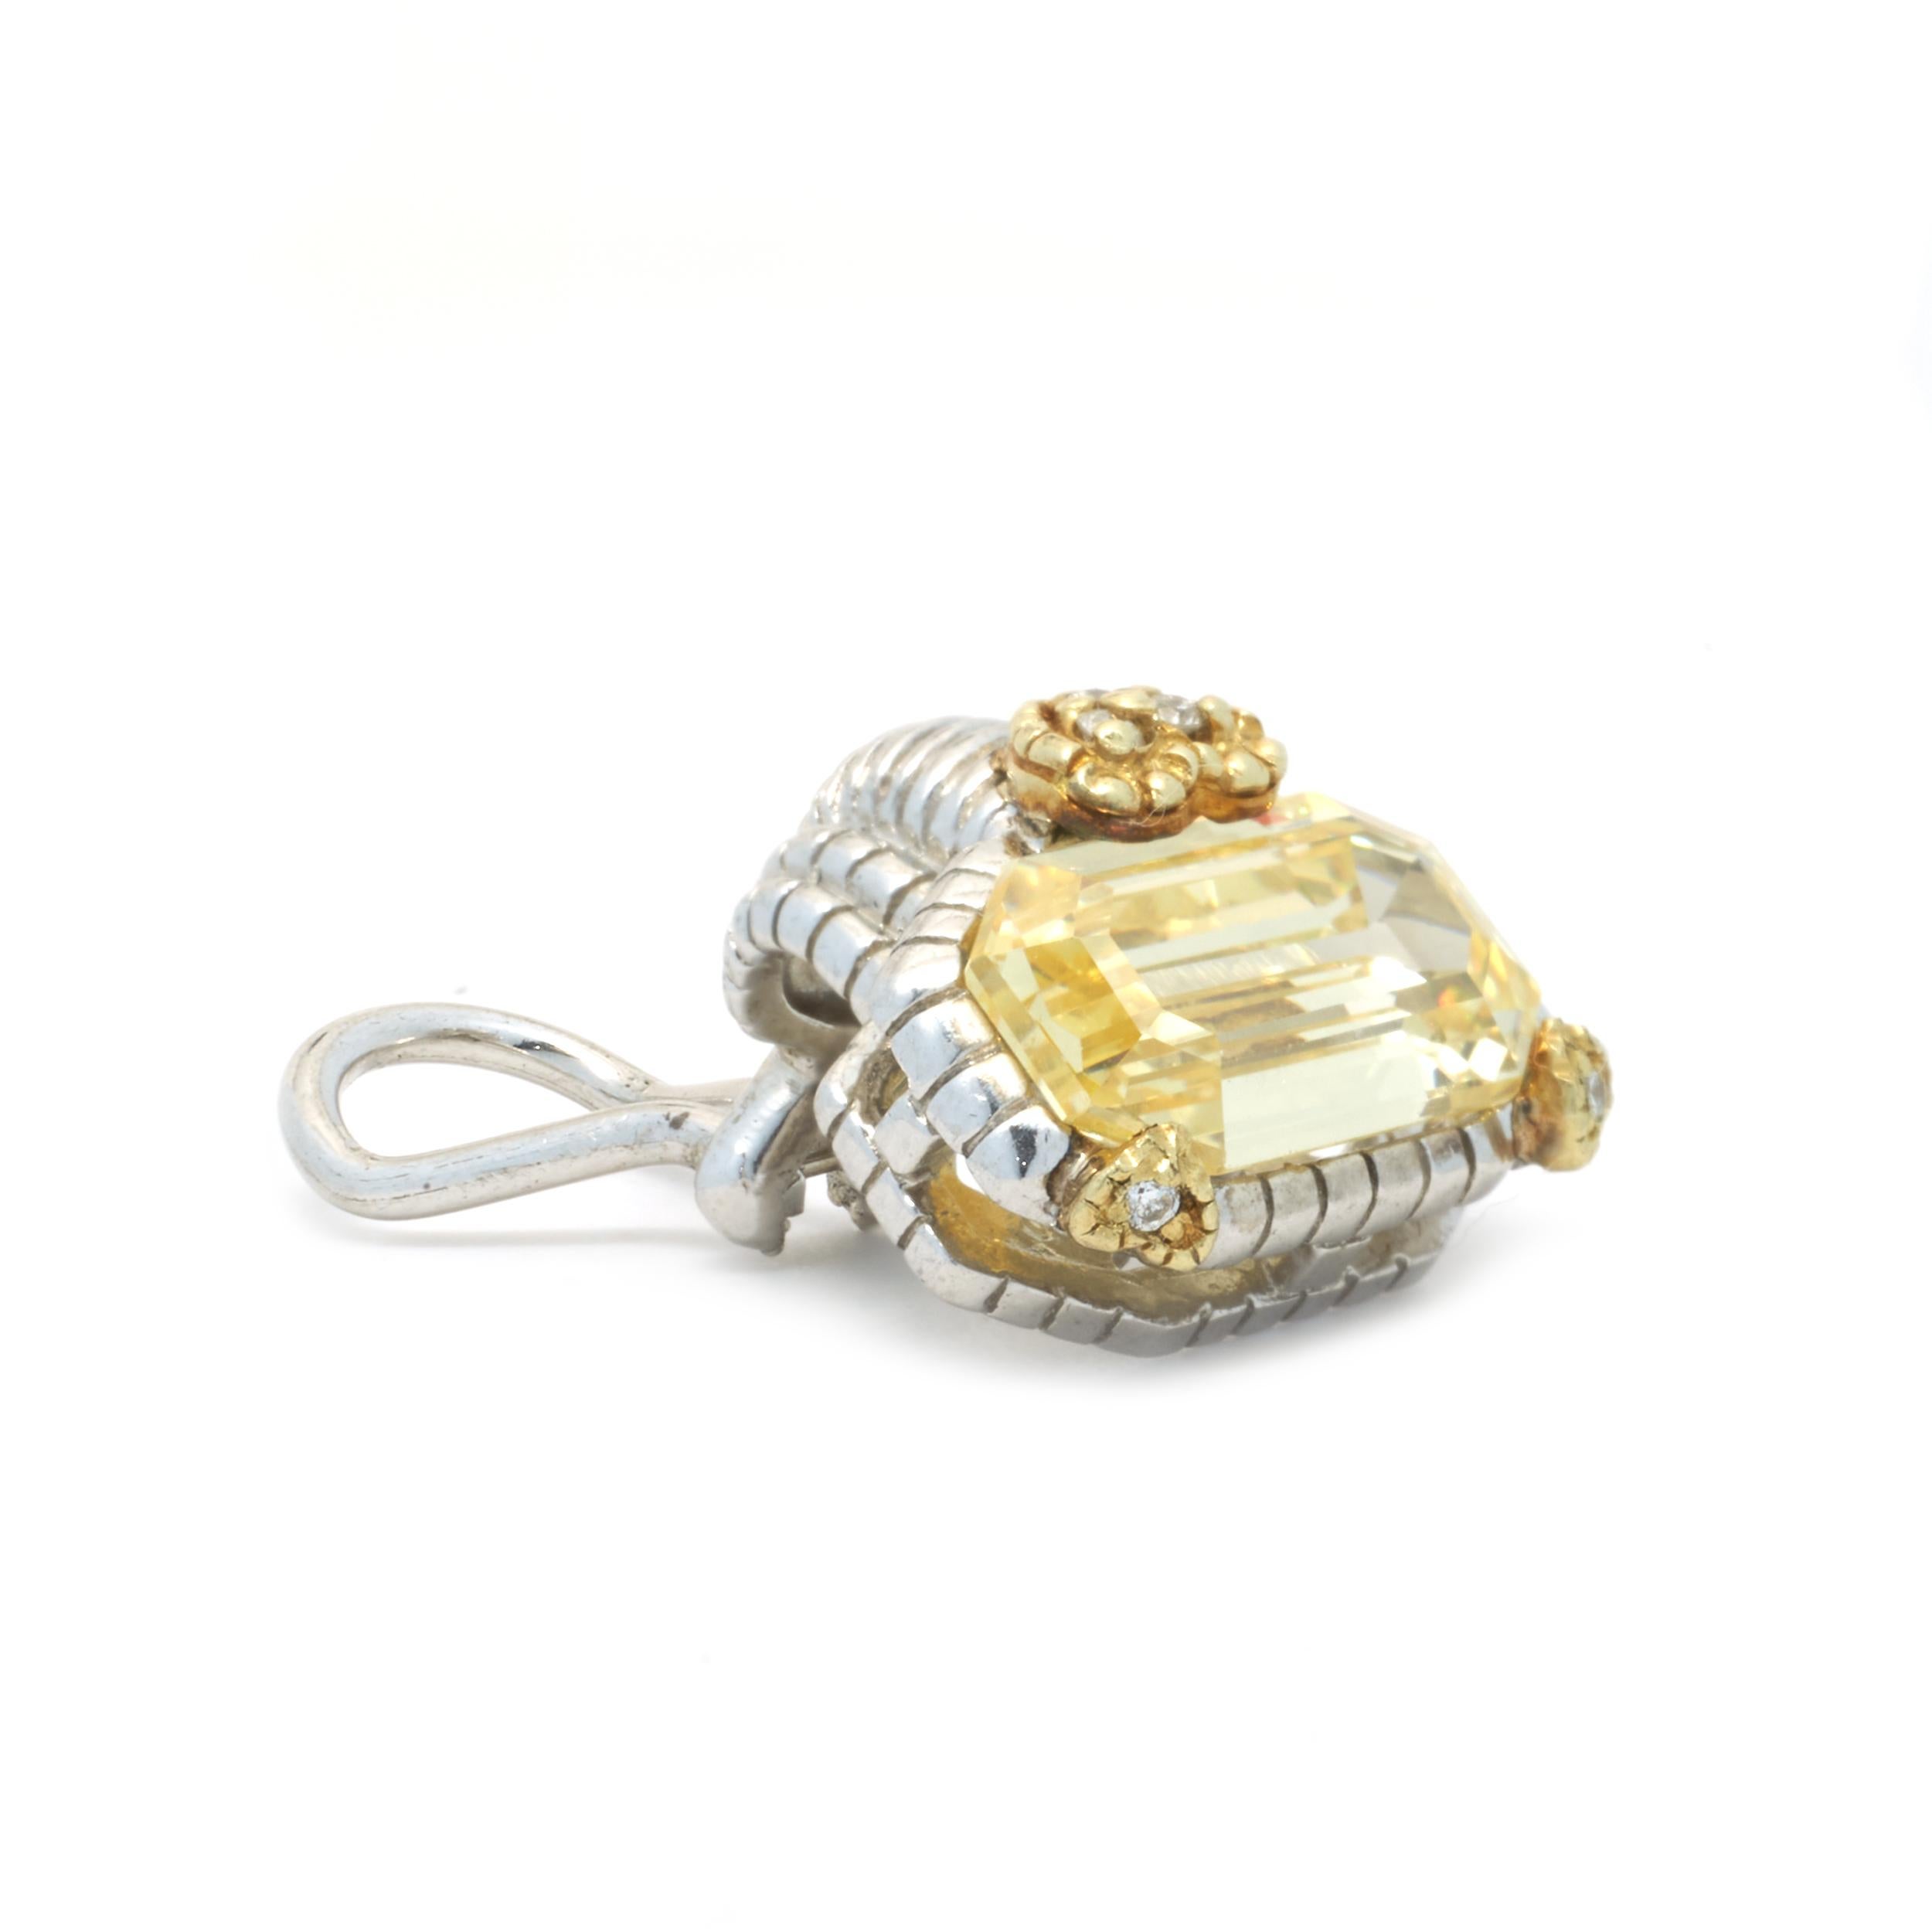 Designer: Judith Ripka
Material: 18k yellow gold & sterling silver
Diamonds: 10 round cut = .10cttw
Color: G
Clarity: SI1
Dimensions: earrings measure 14.3 X 14.40mm
Weight: 9.18 grams
